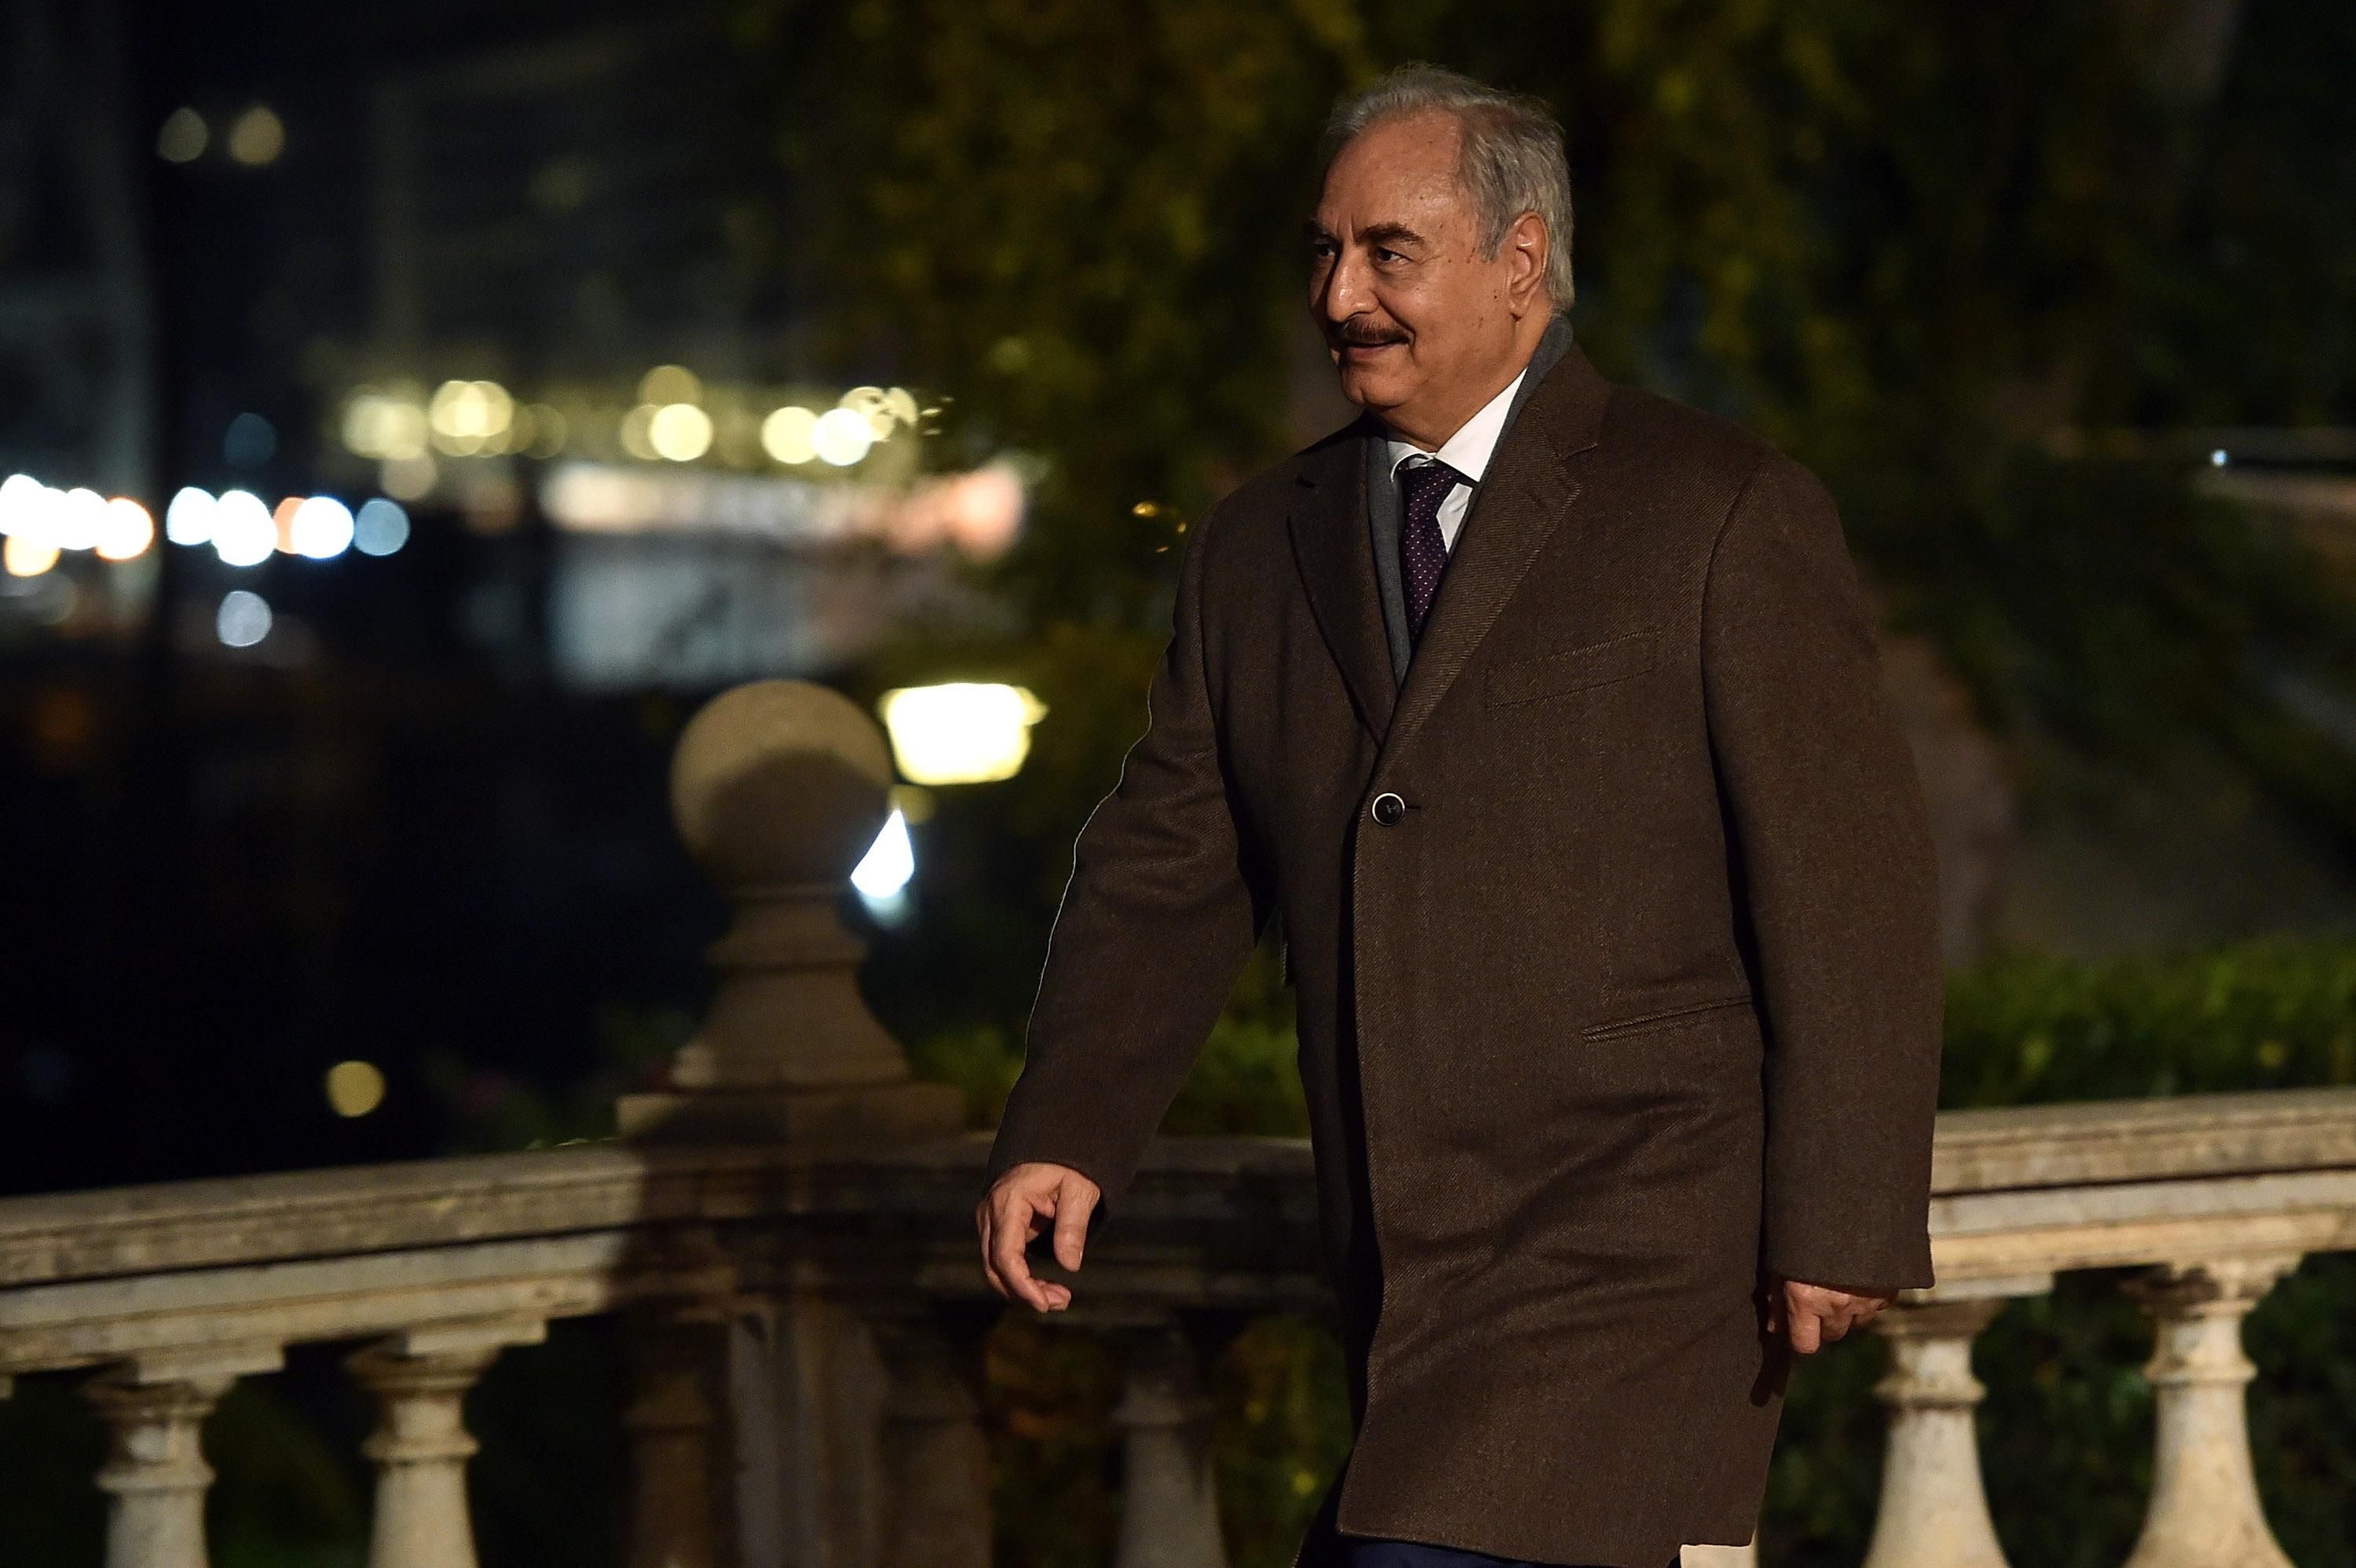 General Khalifa Haftar attends the Conference for Libya at Villa Igiea on November 12, 2018 in Palermo, Italy. (Photo: Tullio Puglia/Getty Images)